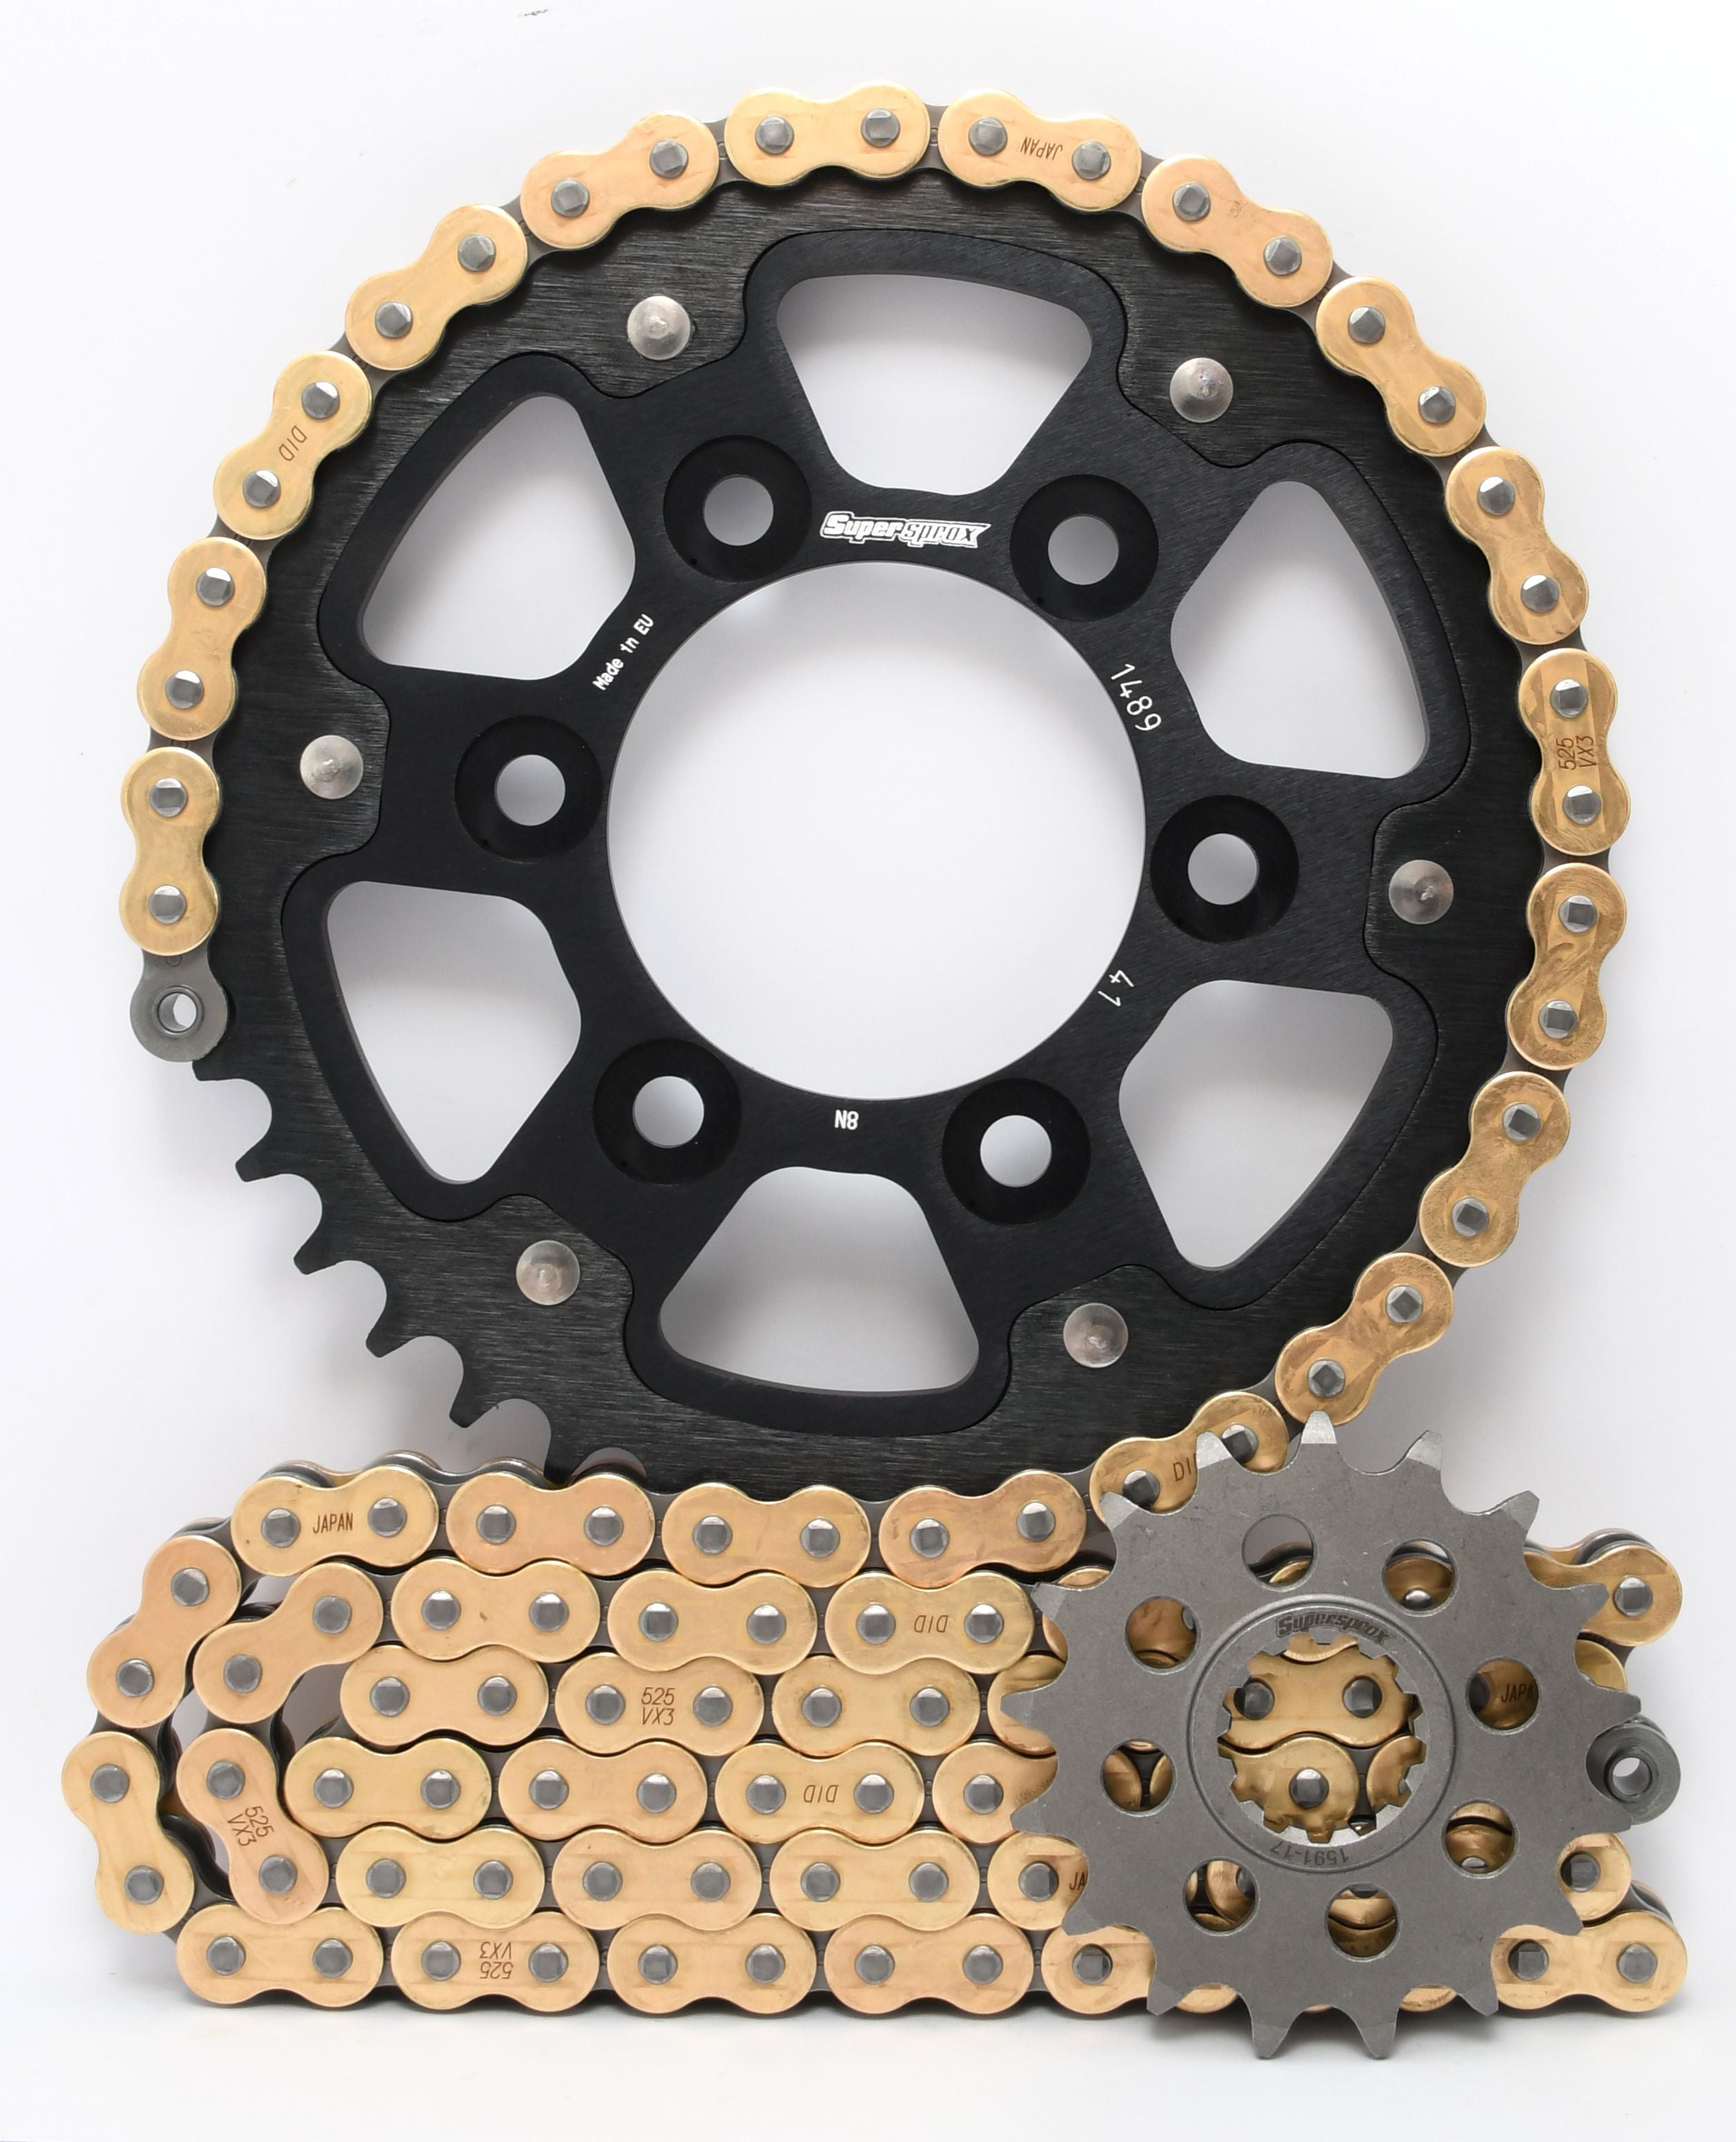 Supersprox Stealth Chain & Sprocket Kit for Kawasaki ZX6R 98-02 - Standard Gearing